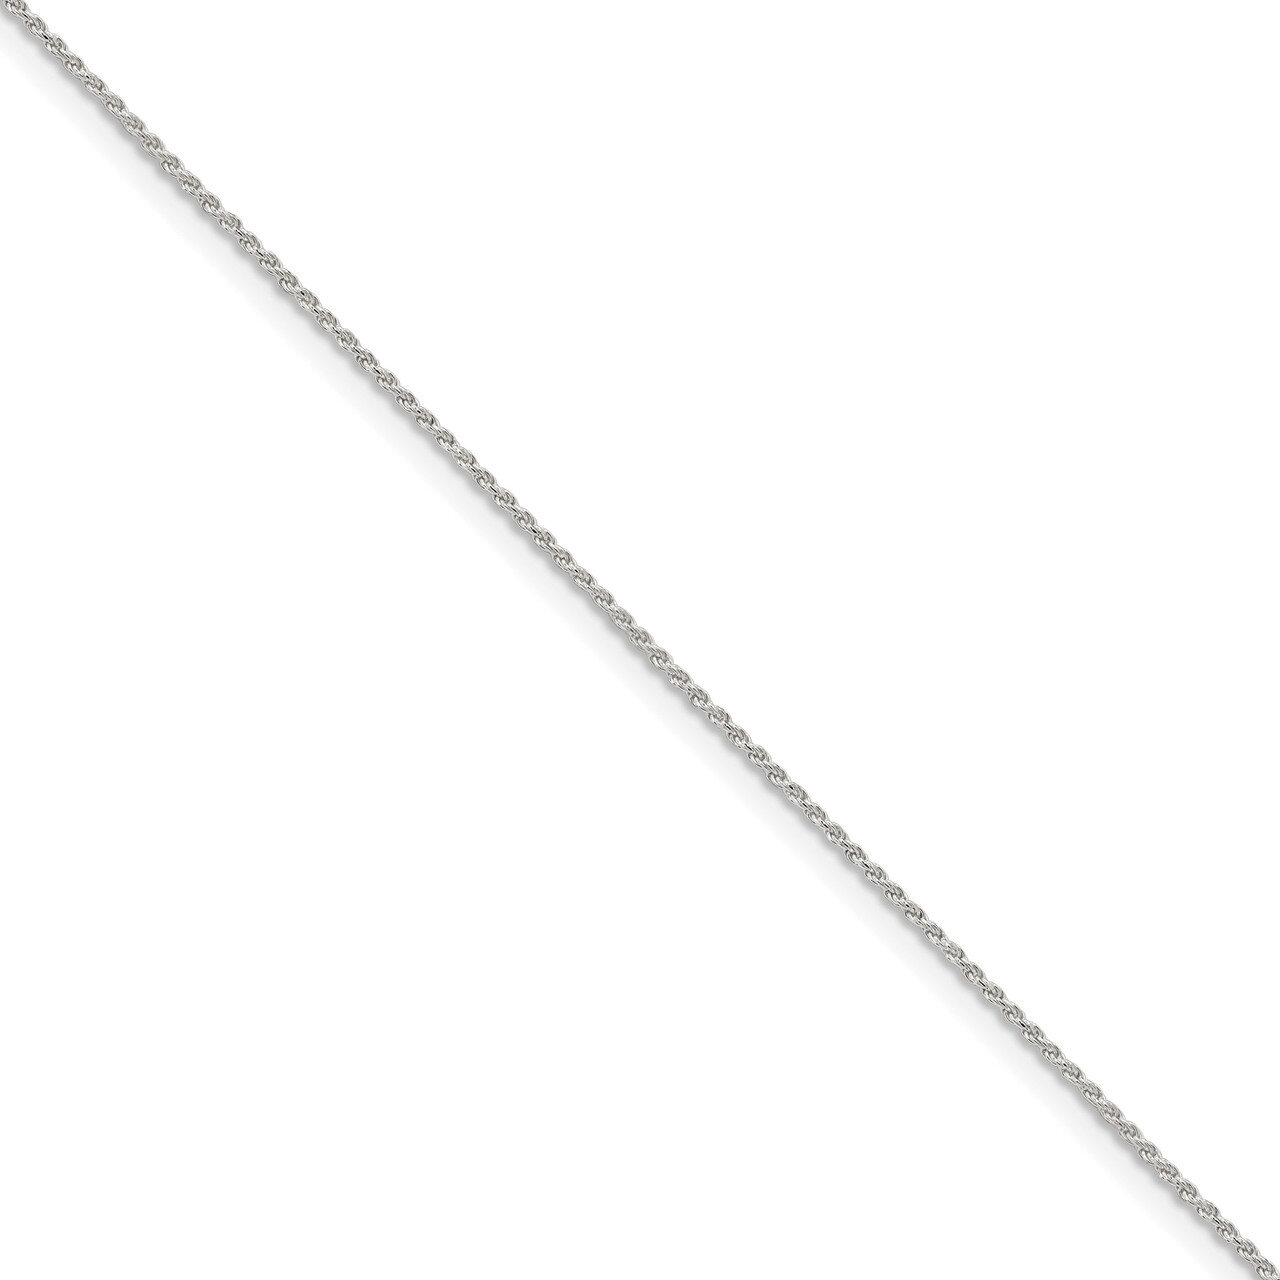 7 Inch 1.1mm Diamond-cut Rope Chain Sterling Silver QDC015-7